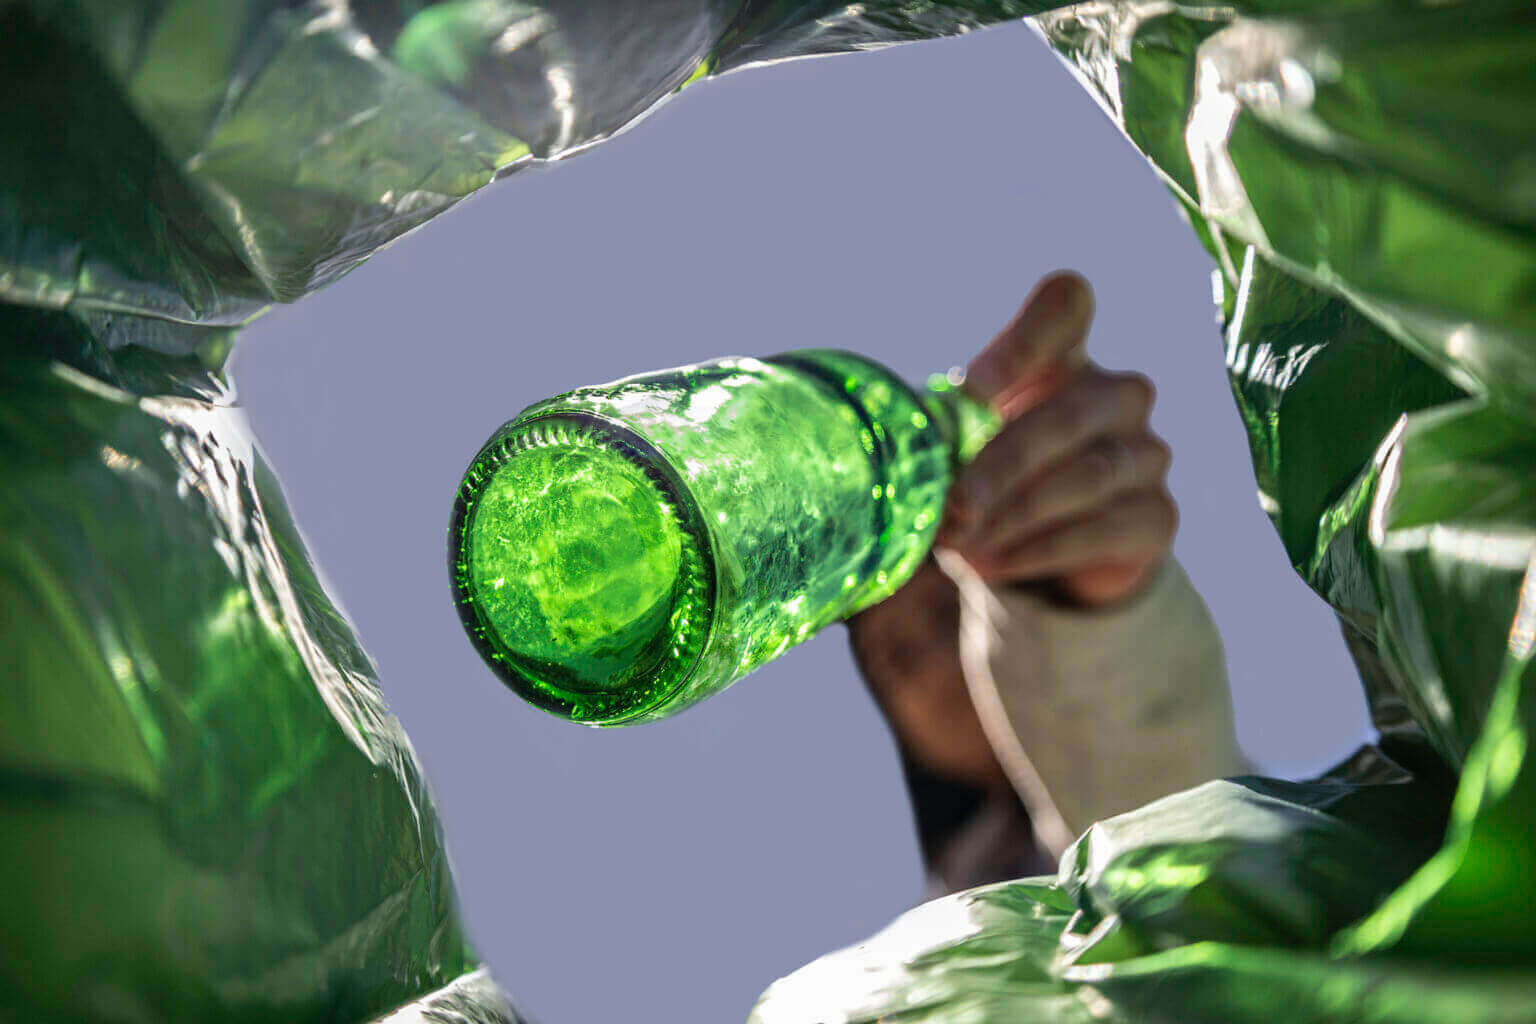 Person recycling a glass bottle into a green container for glass